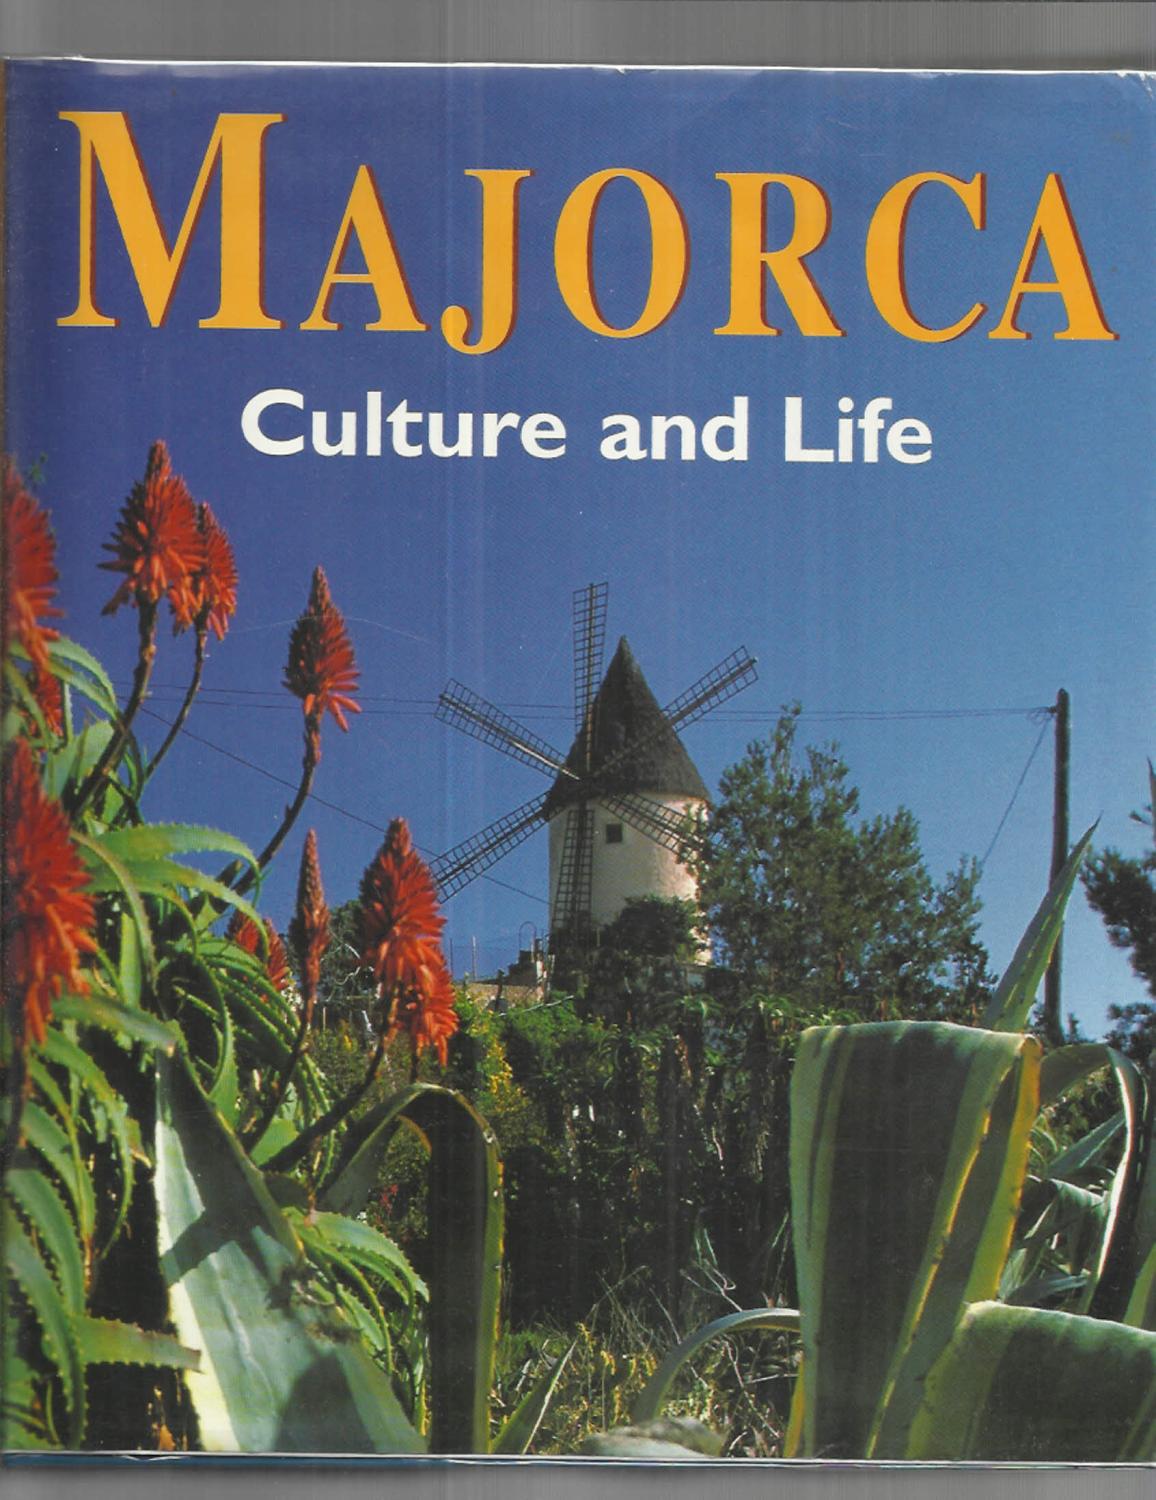 MAJORCA: Culture And Life. Photographed By Gunter Beer, Carlos Agustin And Belen Tanago. Contributions From Susanne Bierneyer And Susanne van Cleve Assisted By Raphael Pherrer. - Hammer, Ute Edda, Tonina Oliver & Frank Schauhoff (Edited By)